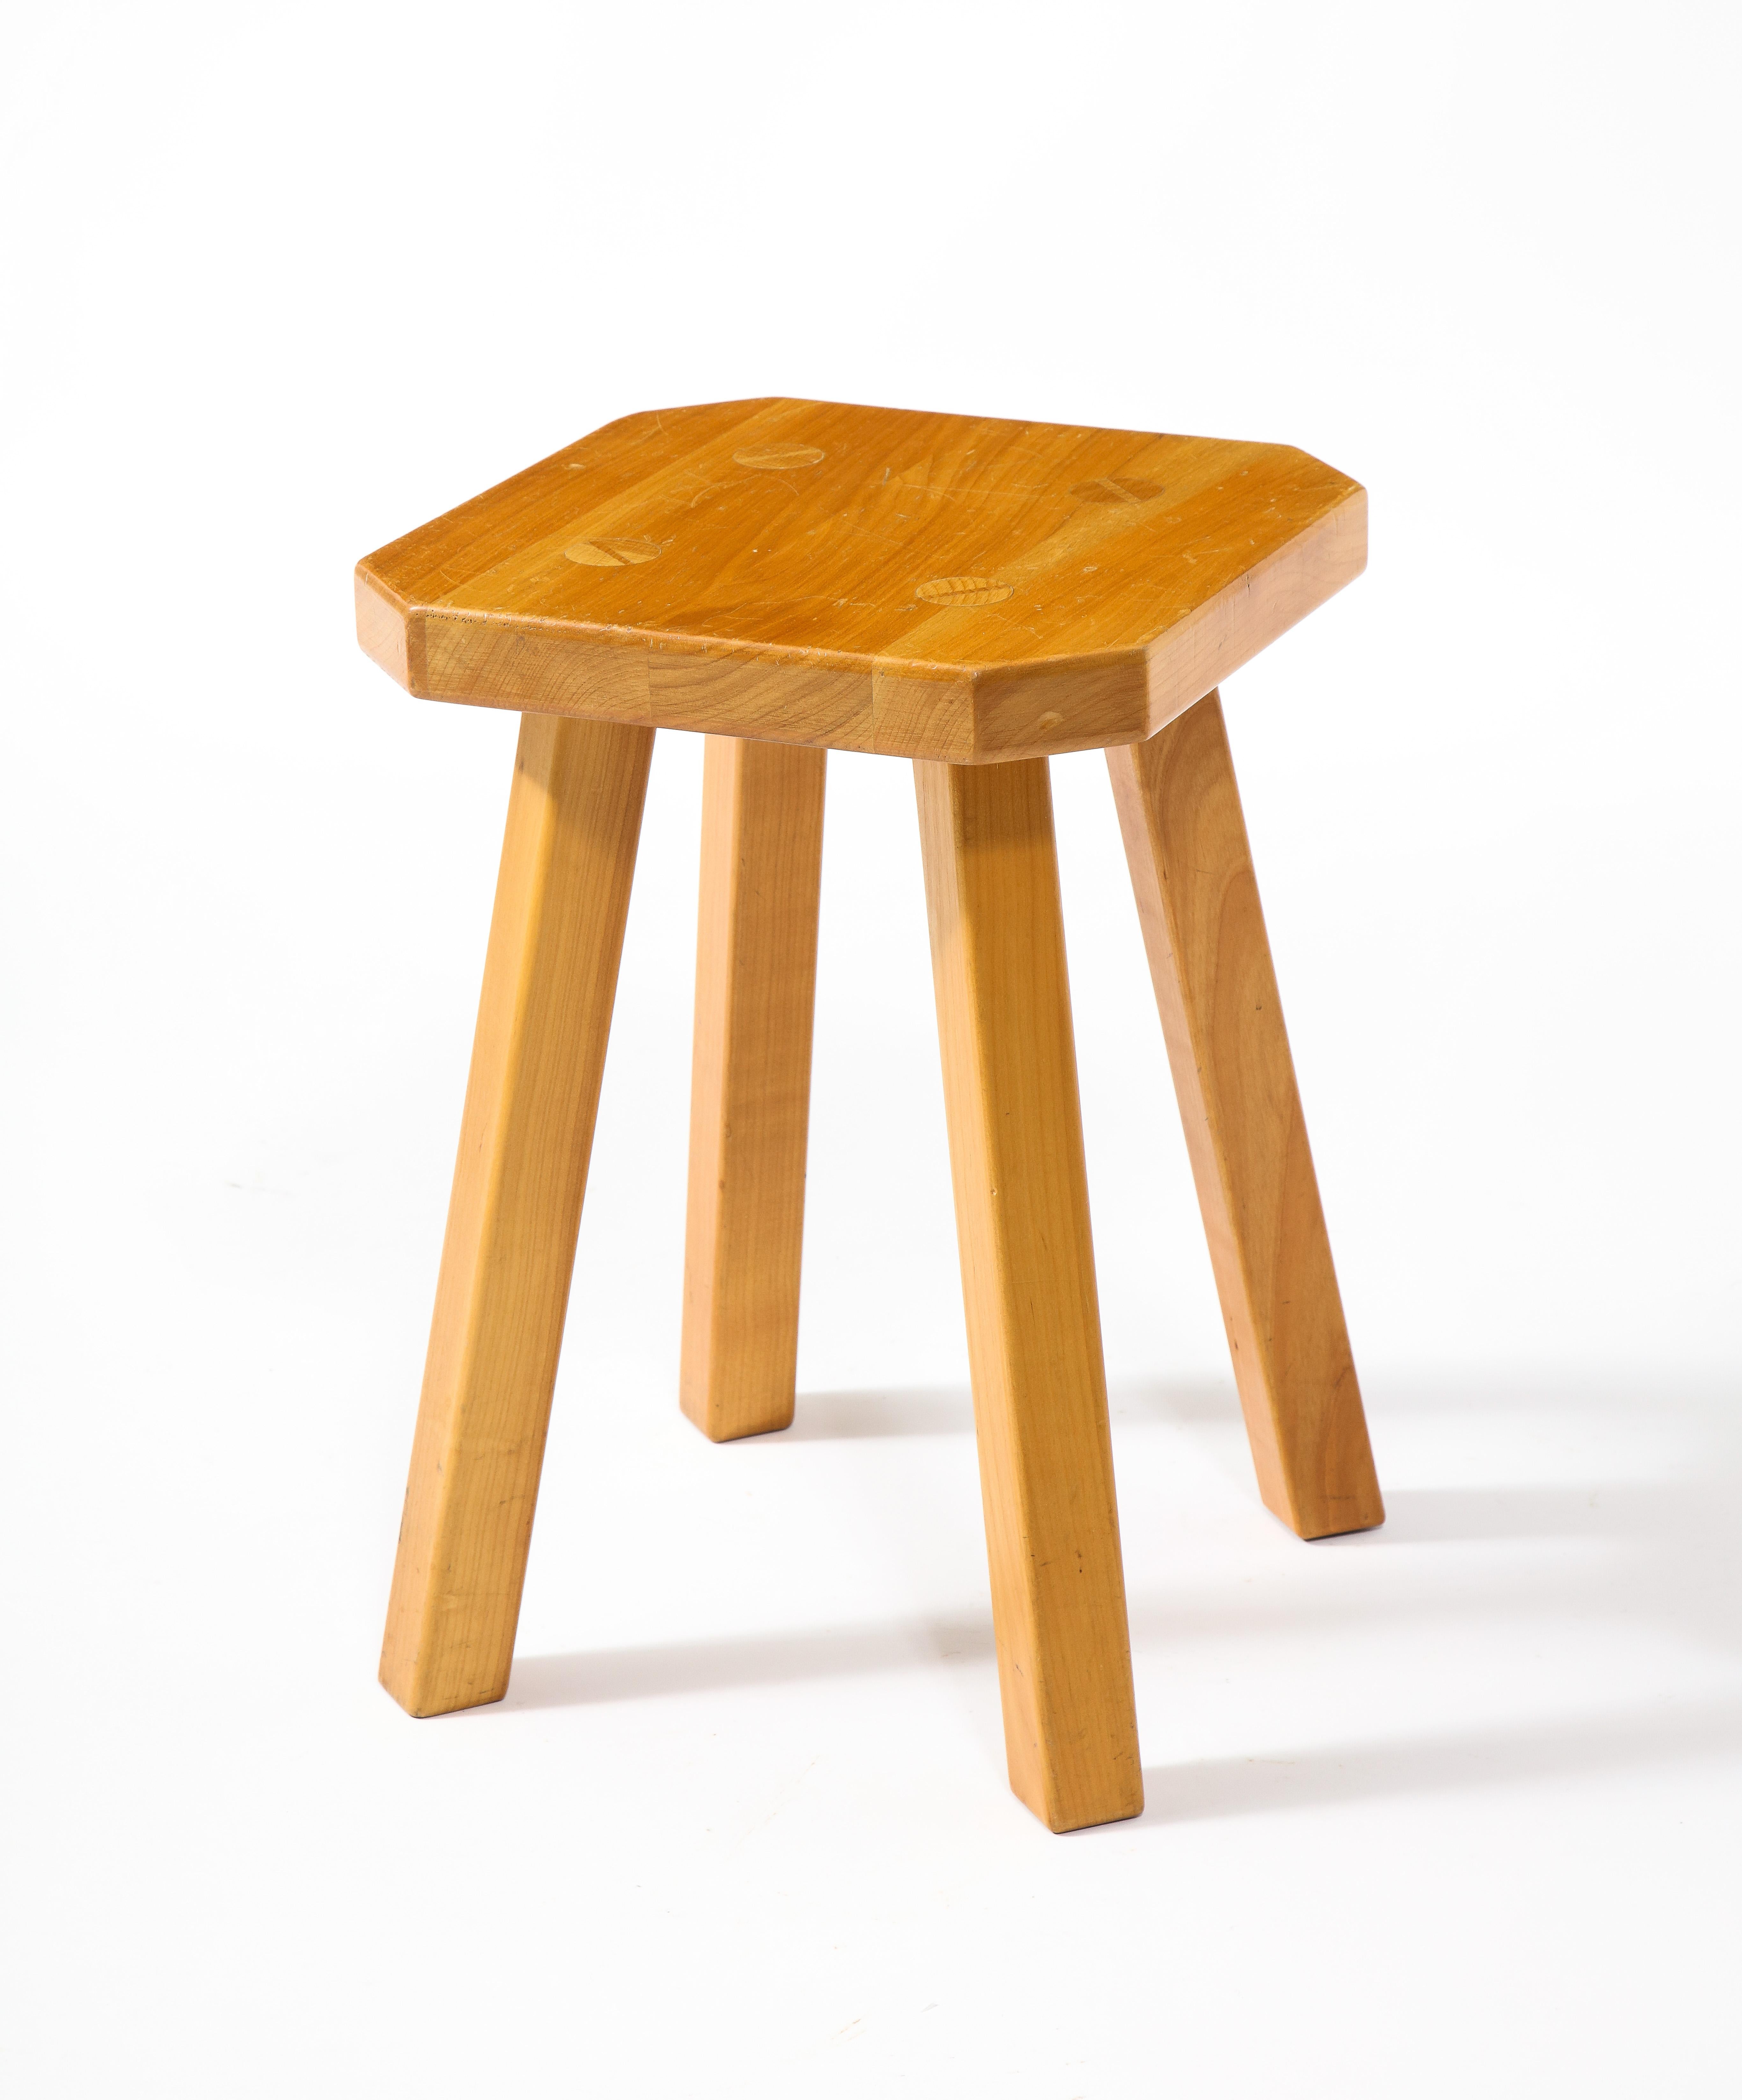 Pair of Solid Elm Stools Square with Chamfers and Through Tenons, France 1960's For Sale 6